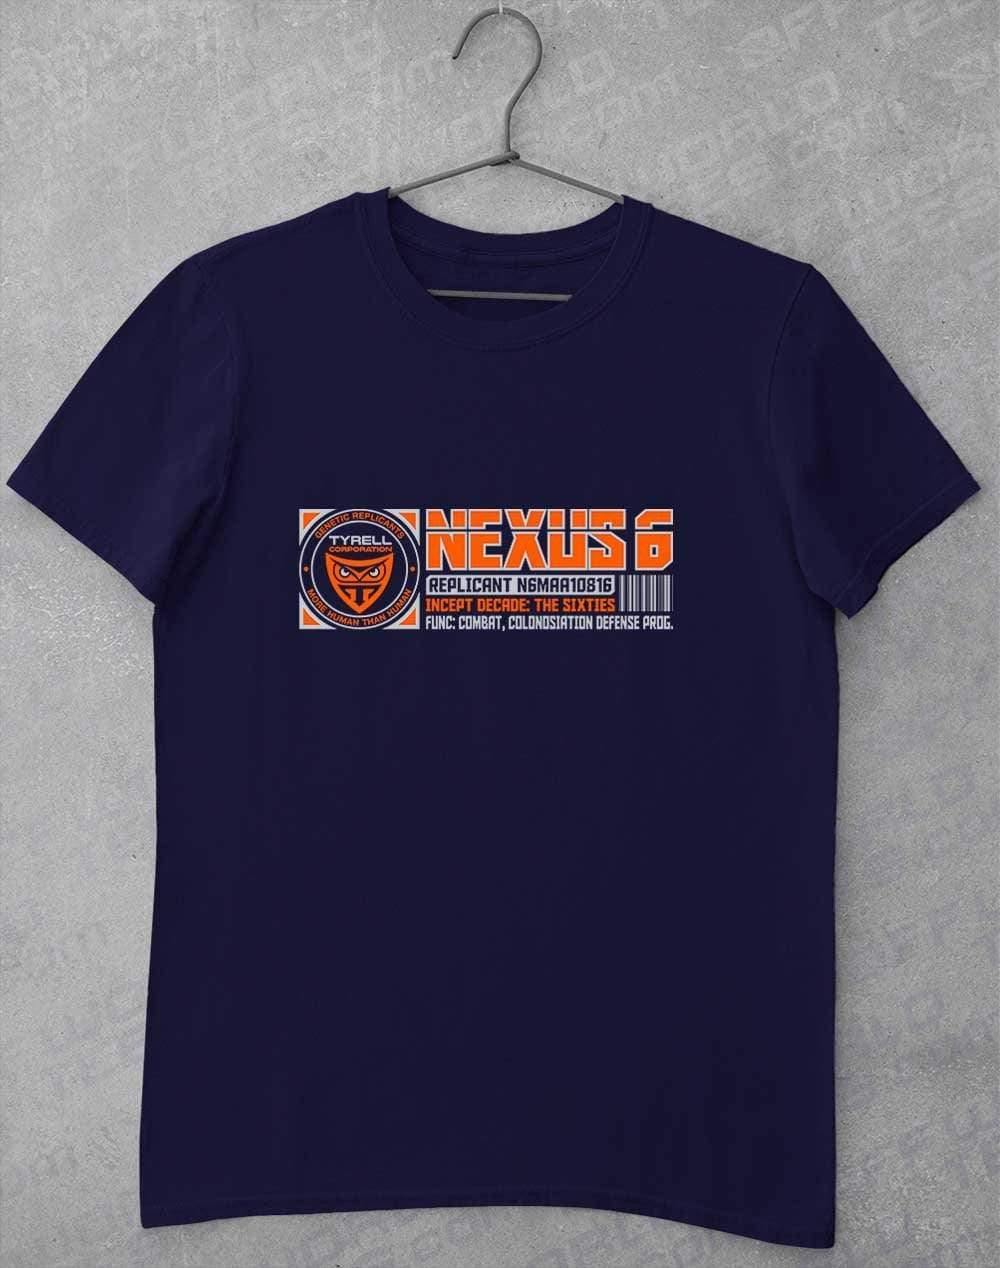 Nexus 6 Replicant Incept Date (CHOOSE YOUR DECADE!) T-Shirt The Sixties - Navy / S  - Off World Tees